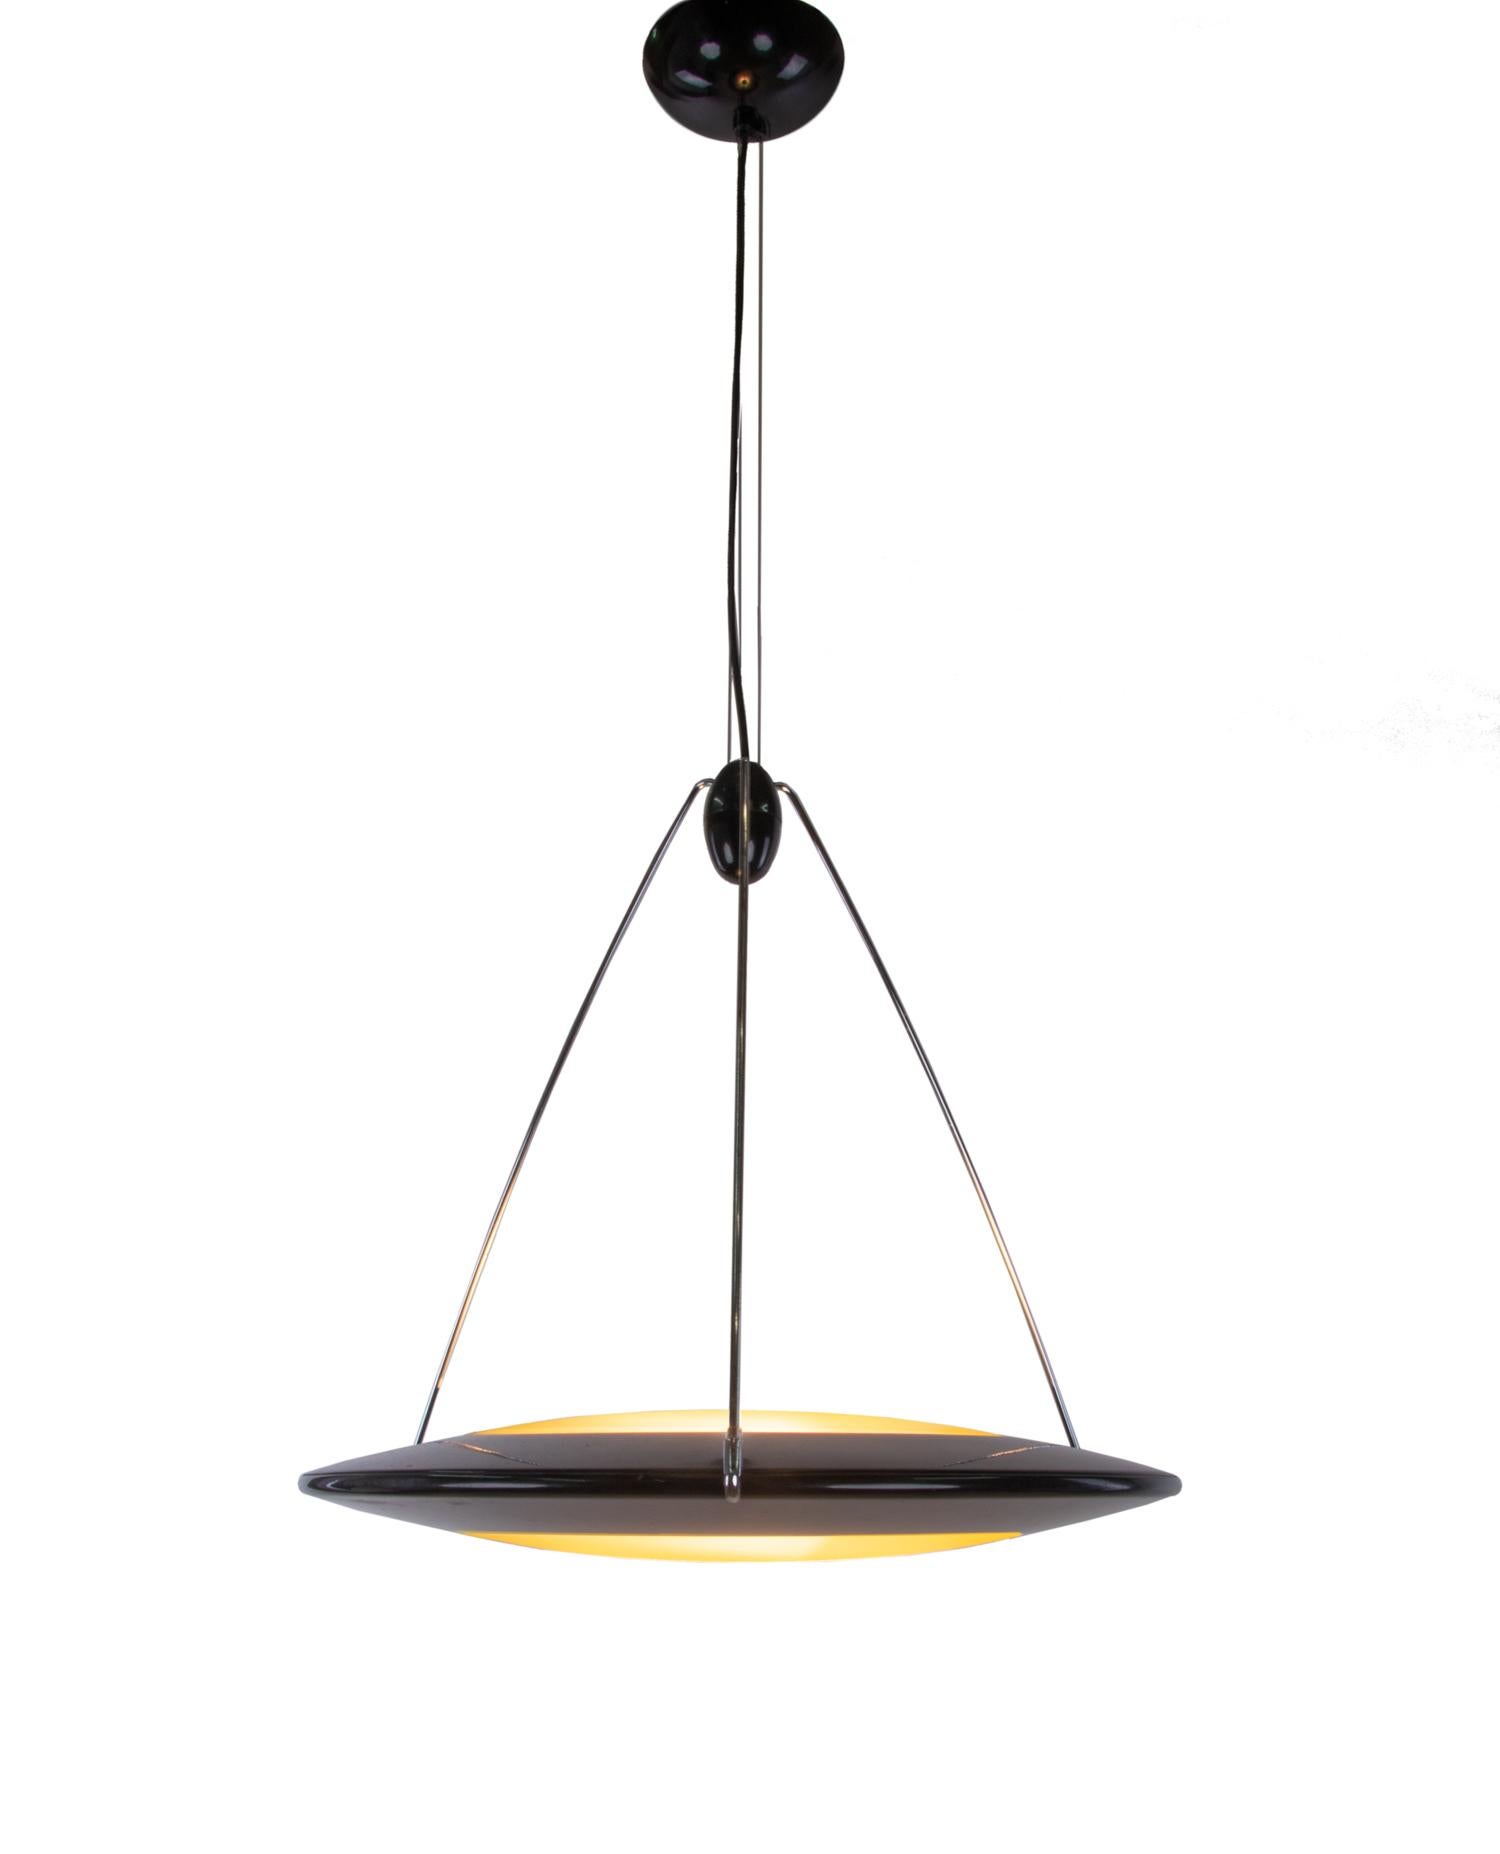 Postmodern UFO or flying saucer pendant light giving diffused upward and downward light. A real eye-catcher even unlit. Gem from the time. Designed in the 1990s by Ezio Didone and manufactured by Arteluce (in those years division of FLOS.), Milano,